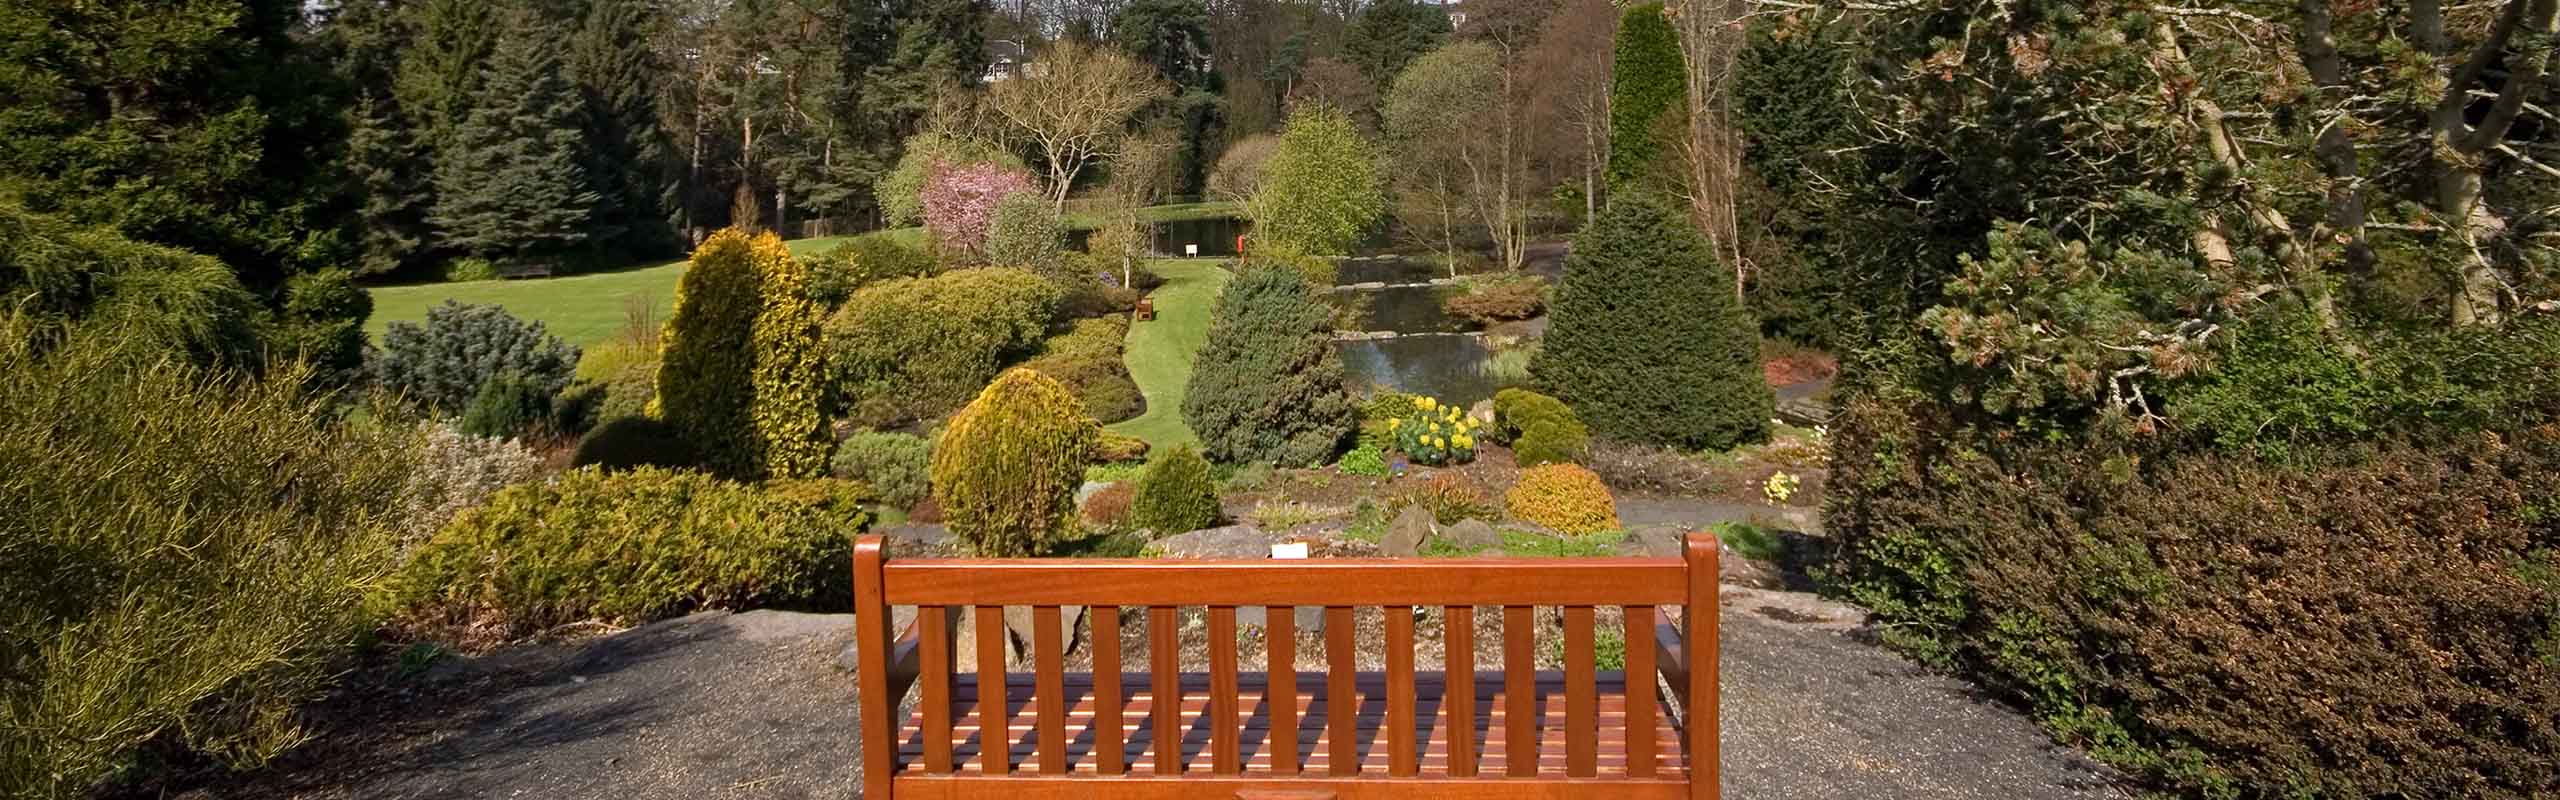 A bench looking over the gardens at St Andrews Botanic Gardens in Scotland